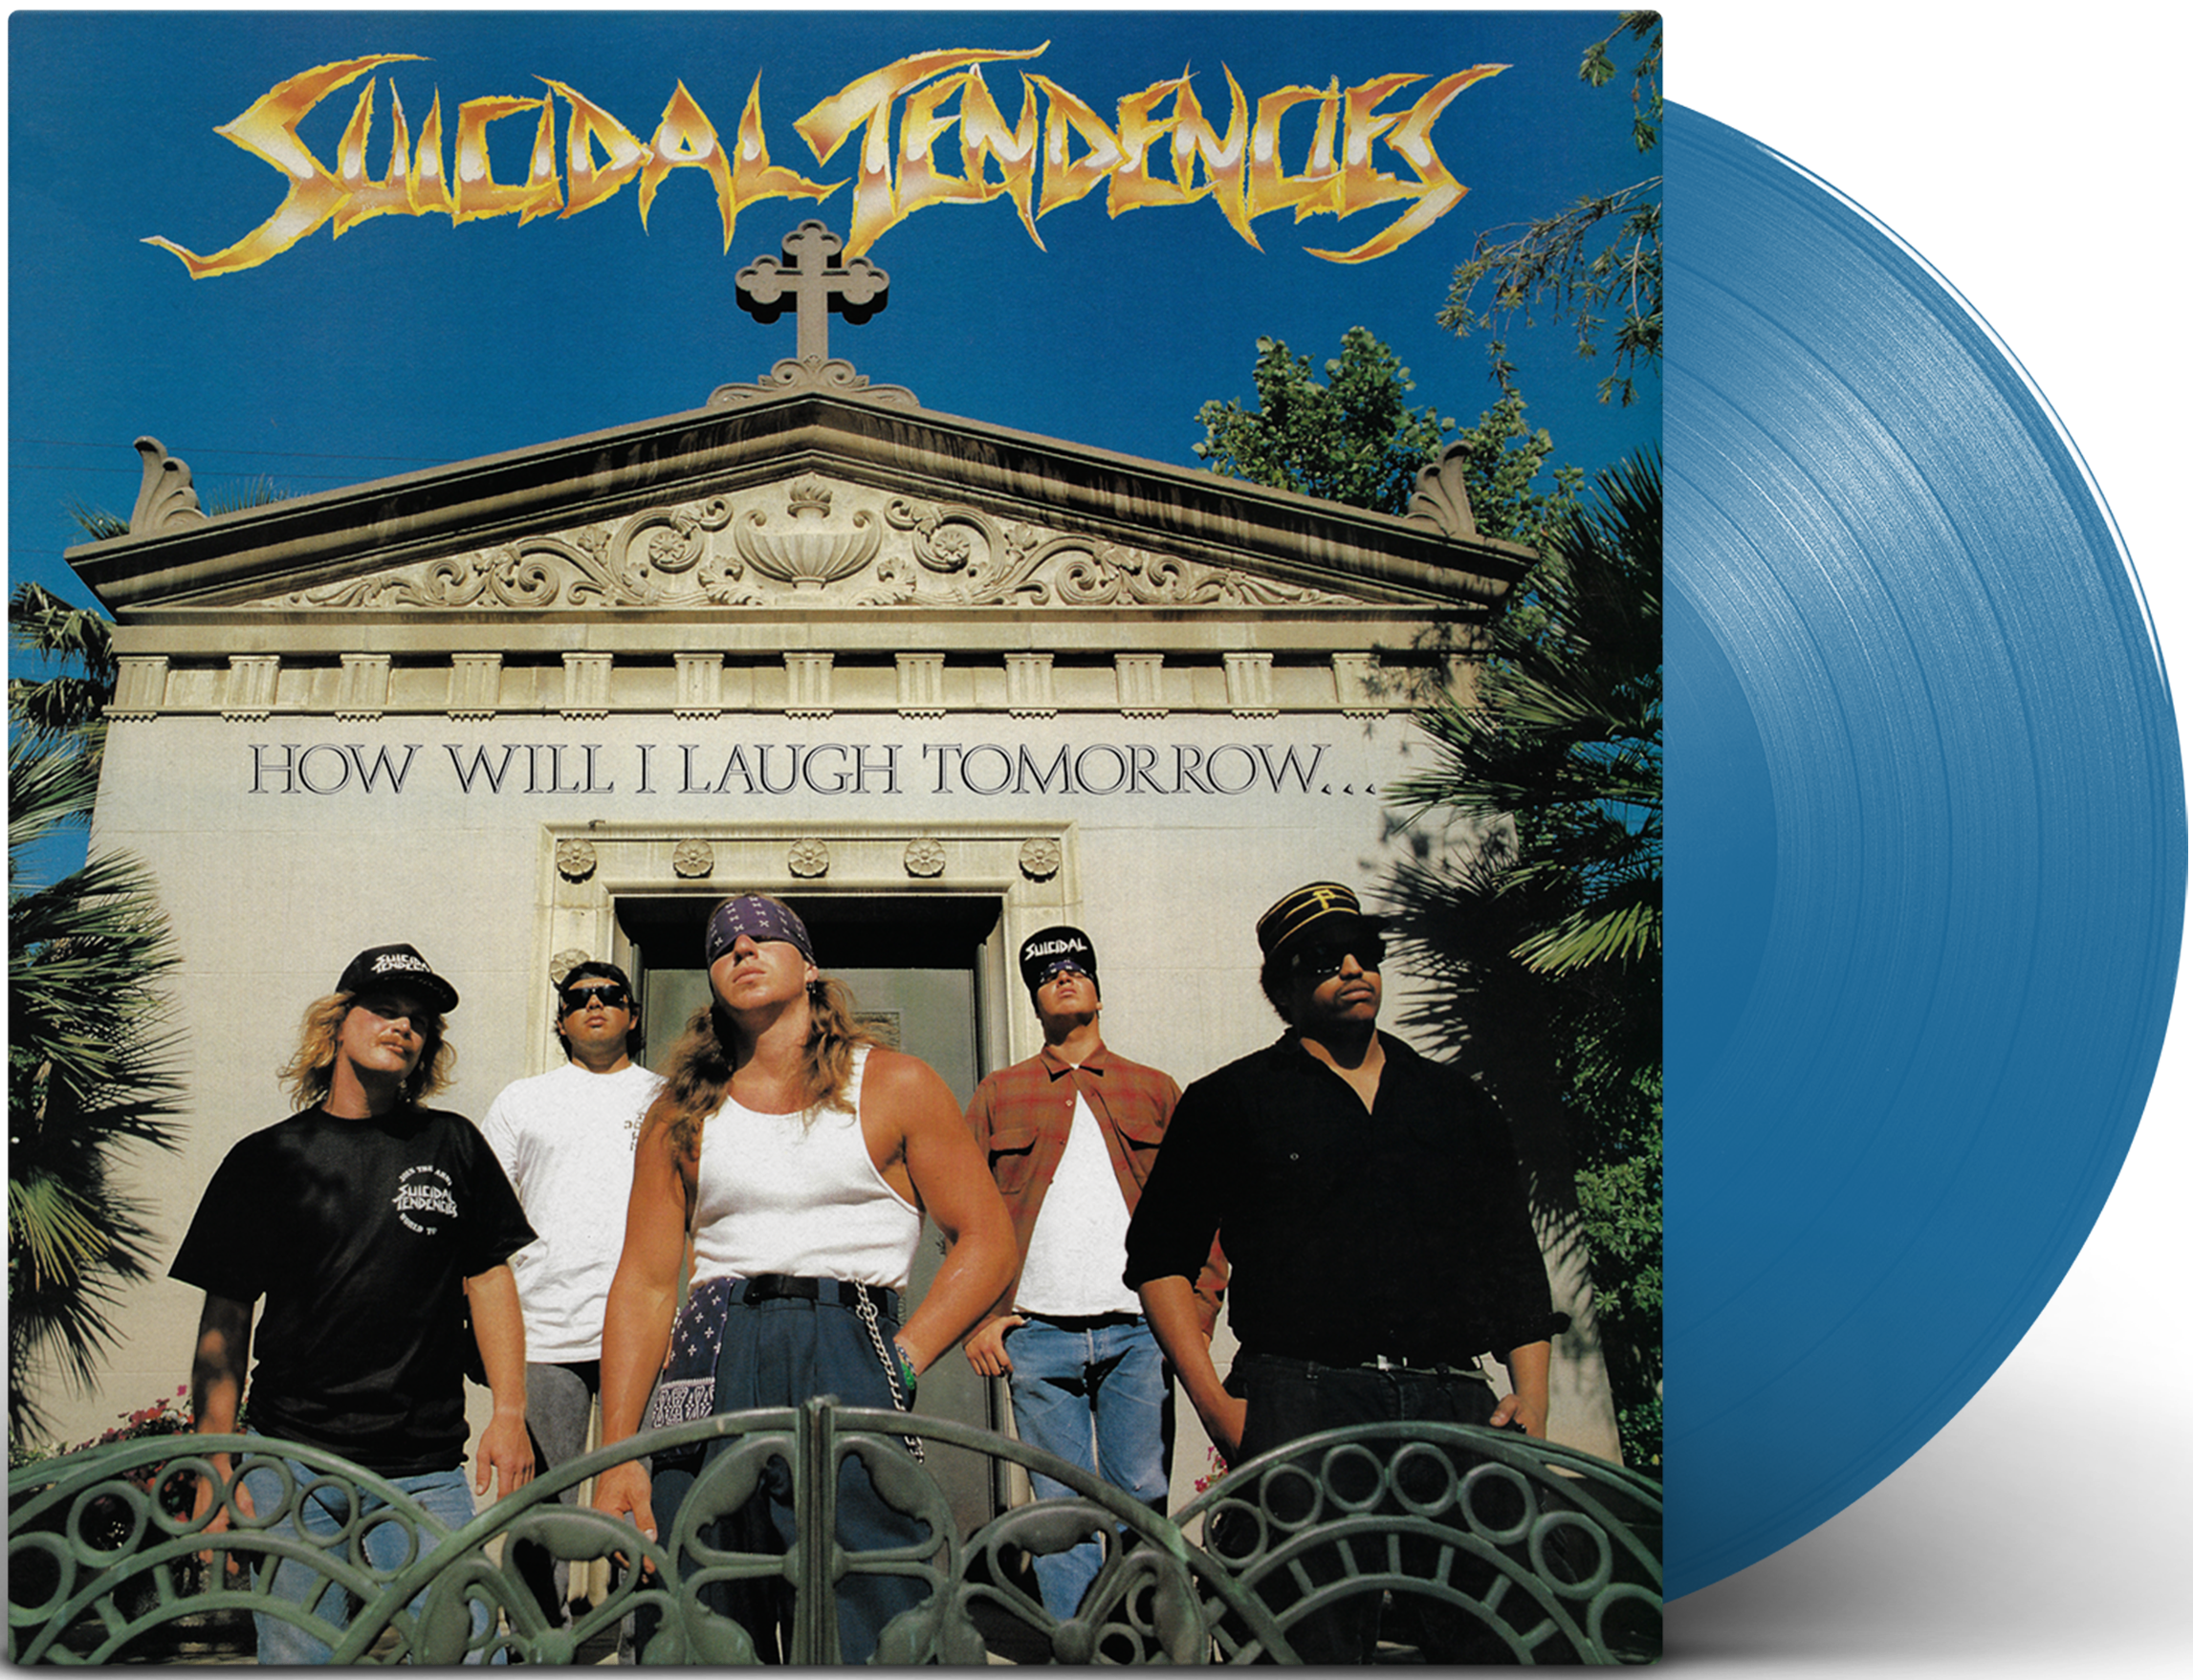 Suicidal Tendencies - How Will I Laugh Tomorrow...When I Can't Even Smile Today (2022 Indie Exclusive Sky Blue vinyl reissue) - Vinyl - New